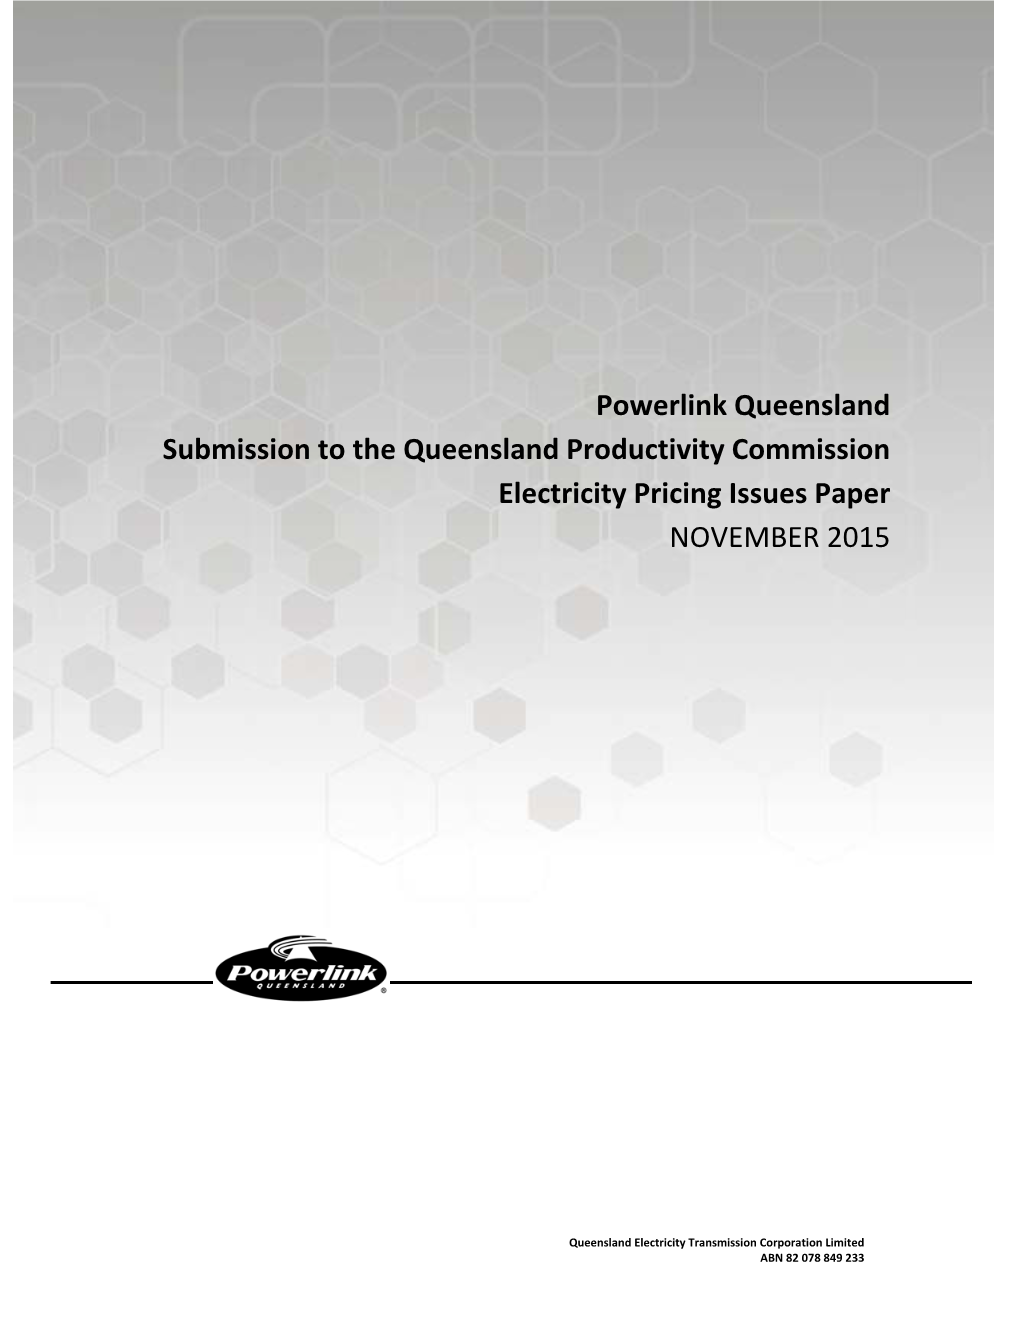 Powerlink Queensland Submission to the Queensland Productivity Commission Electricity Pricing Issues Paper NOVEMBER 2015